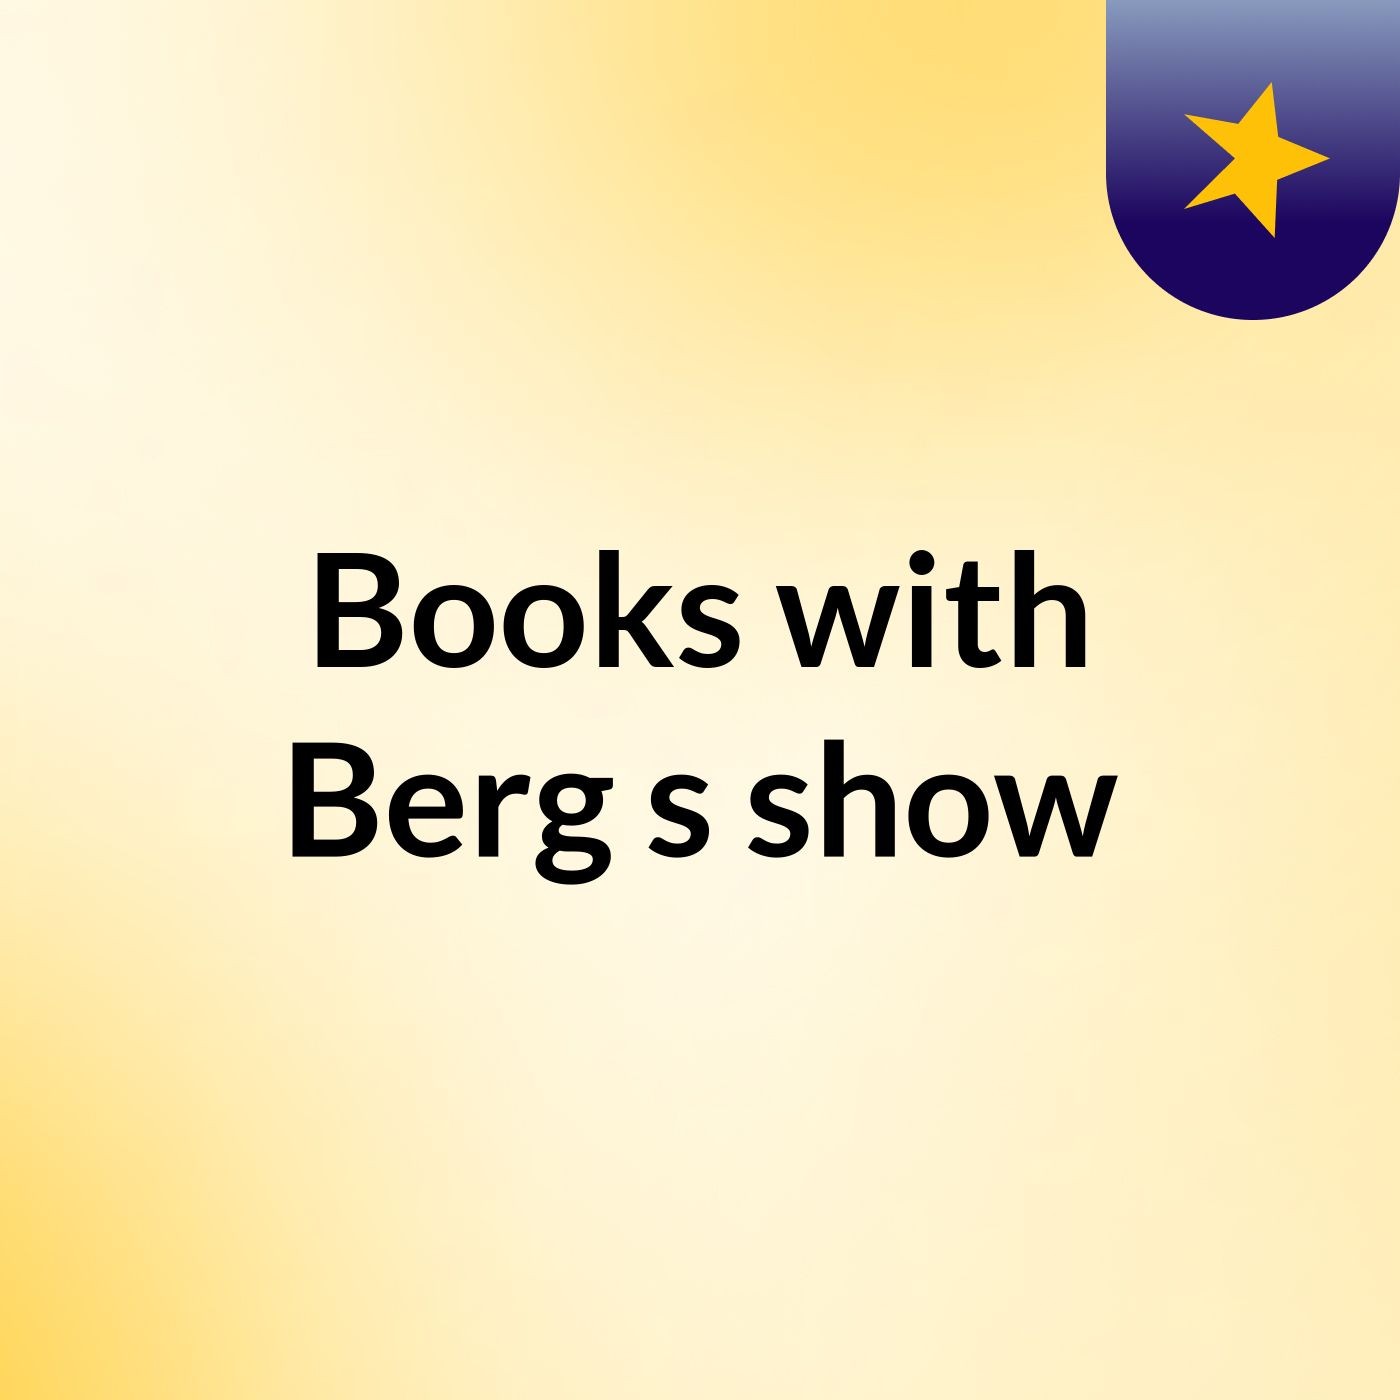 Books with Berg's show